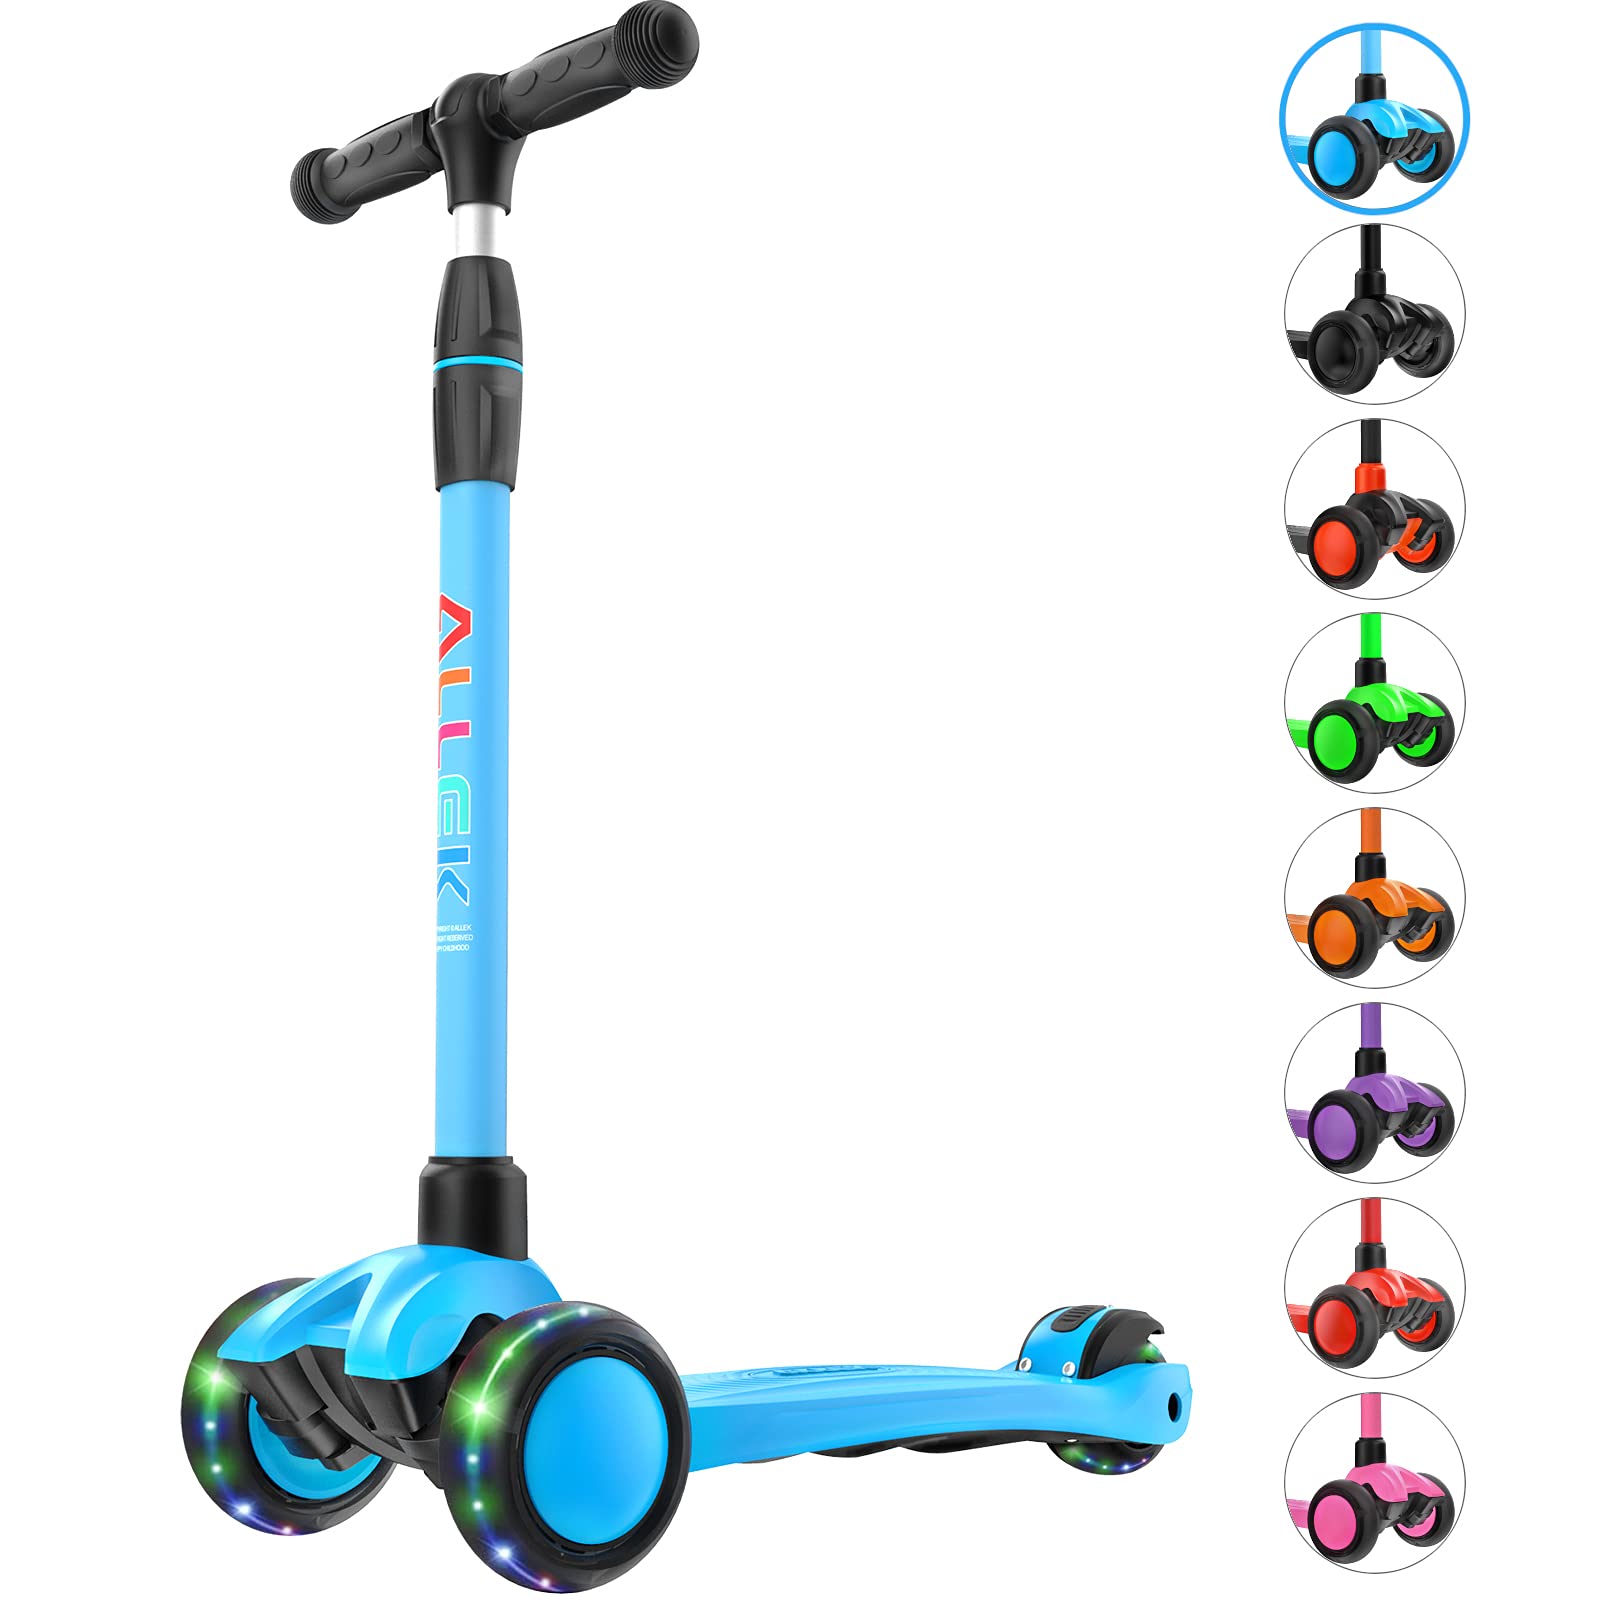 Allek Kick Scooter B03, Lean 'N Glide 3-Wheeled Push Scooter with Extra Wide PU Light-Up Wheels, Any Height Adjustable Handlebar and Strong Thick Deck for Children from 3-12yrs